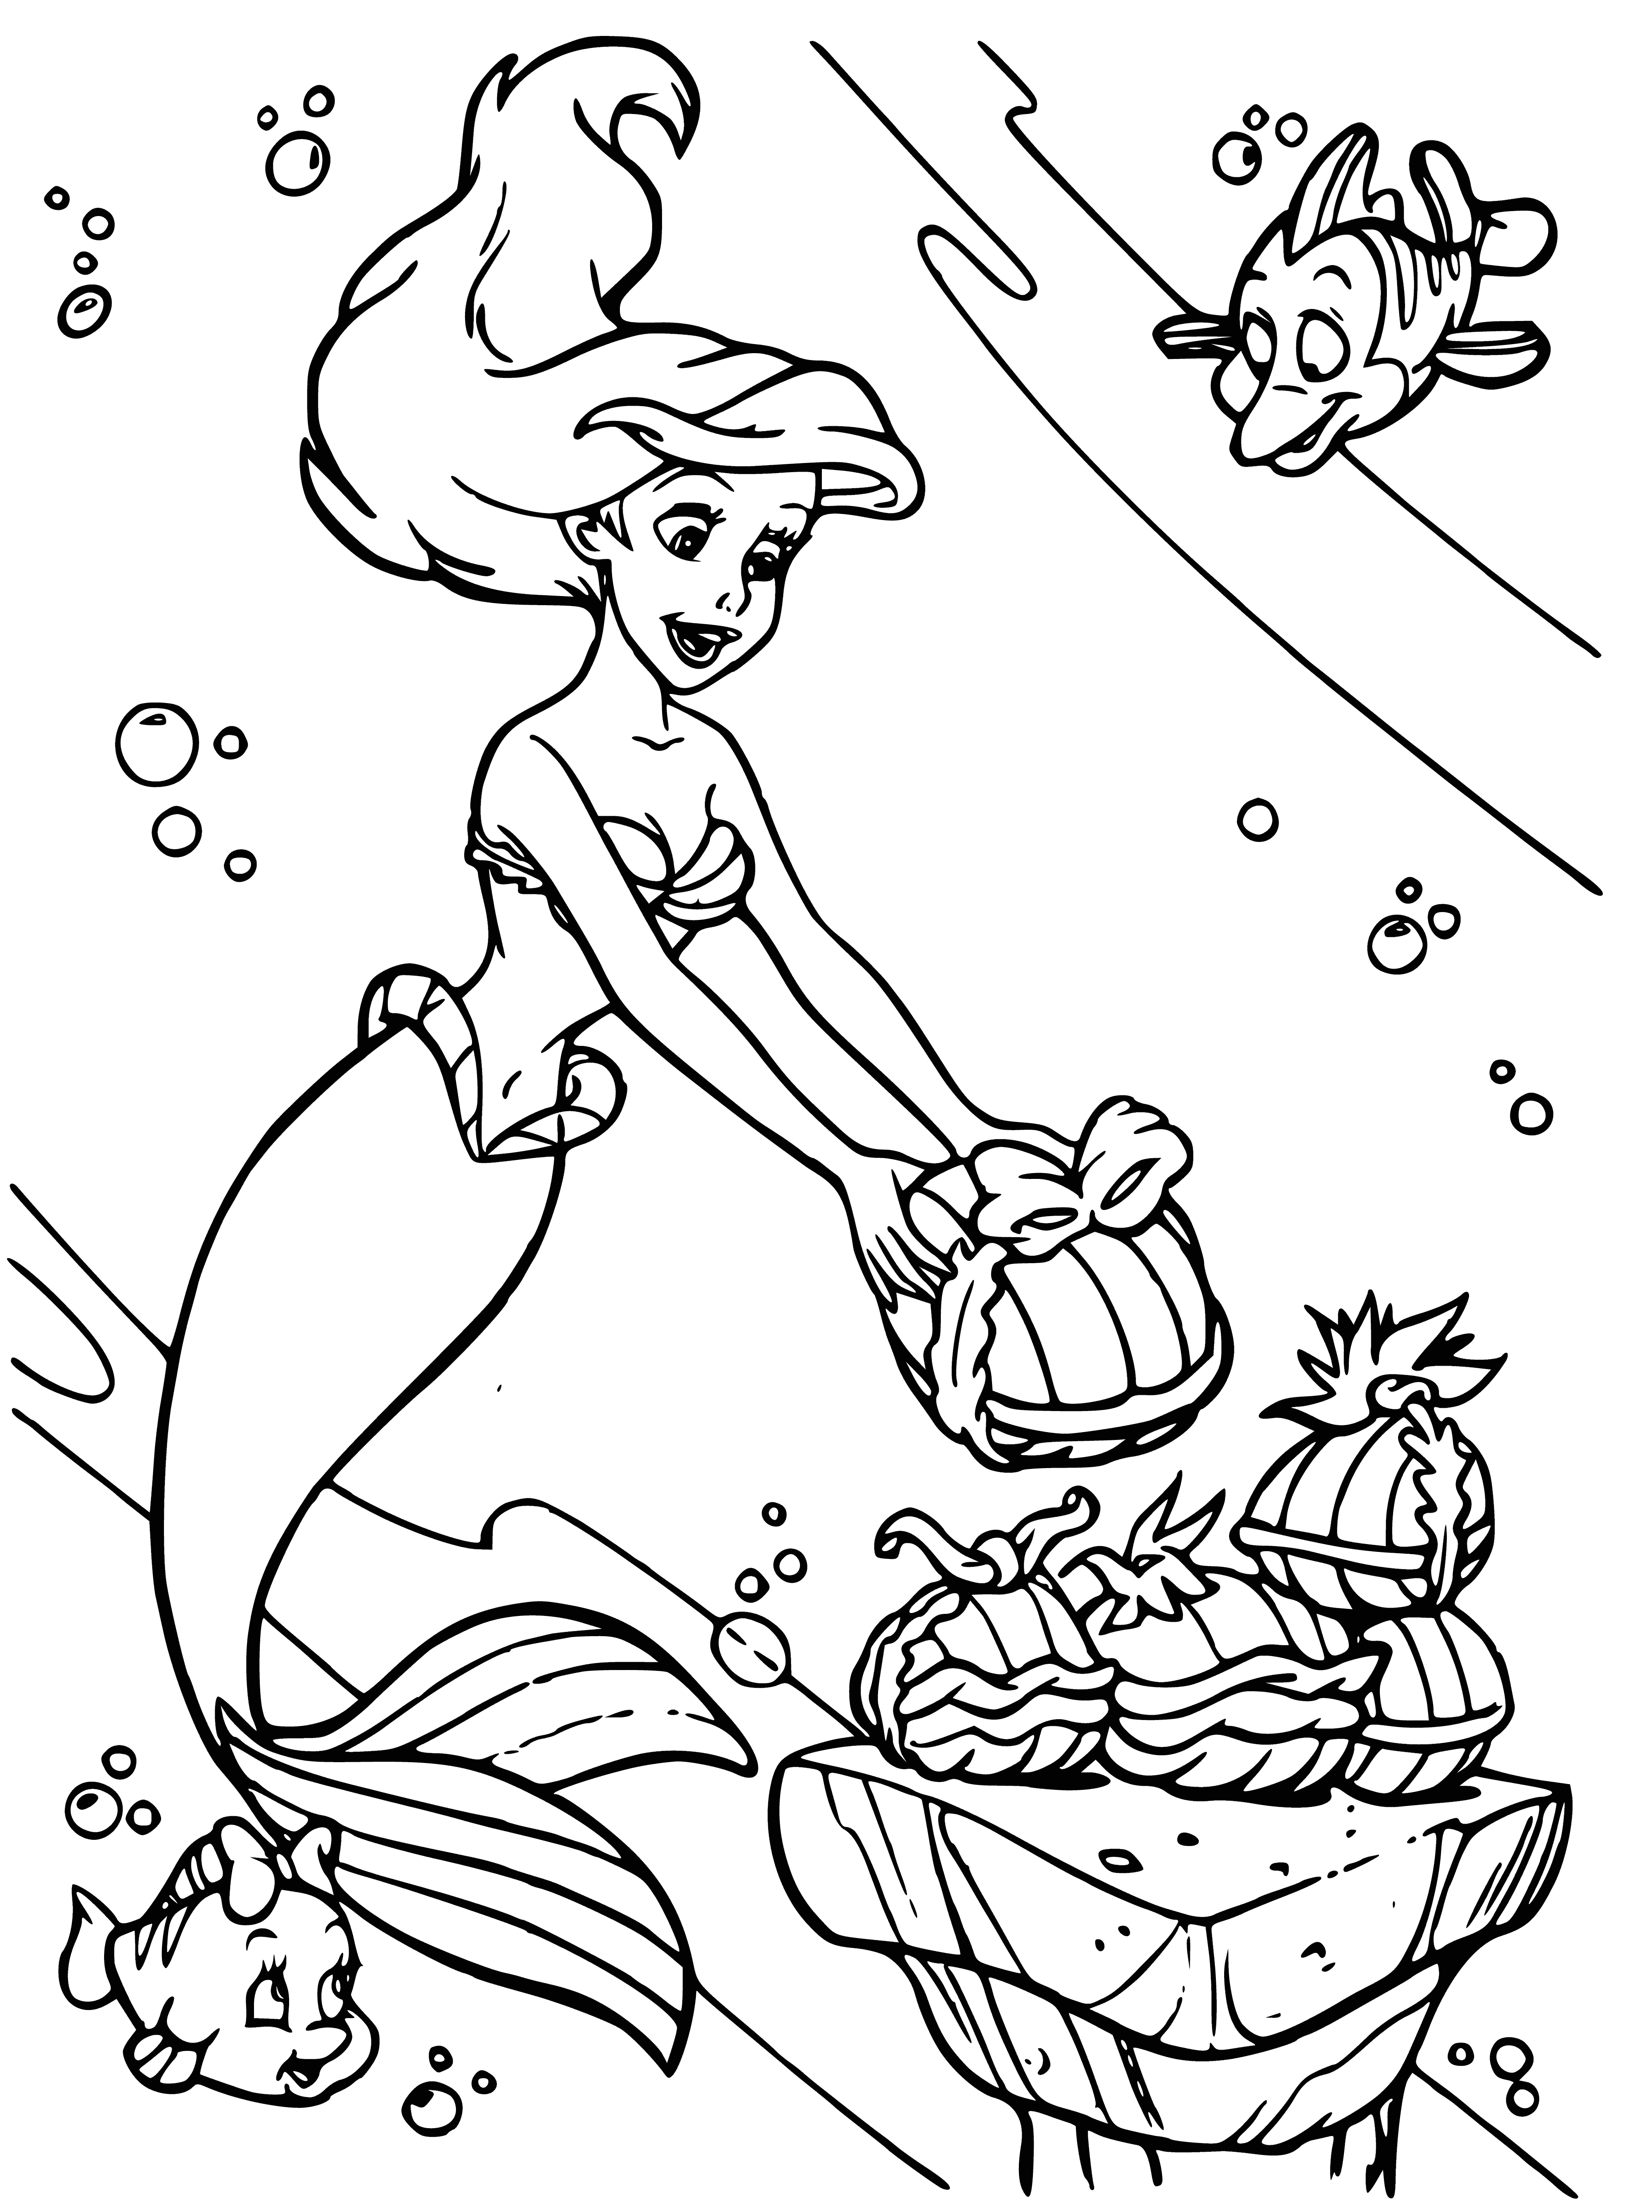 coloring page: Mermaid clamshell w/pearl & goldfish in bowl to right, pink conch shell w/word "Treasures" to left. Underneath each is word in gold.